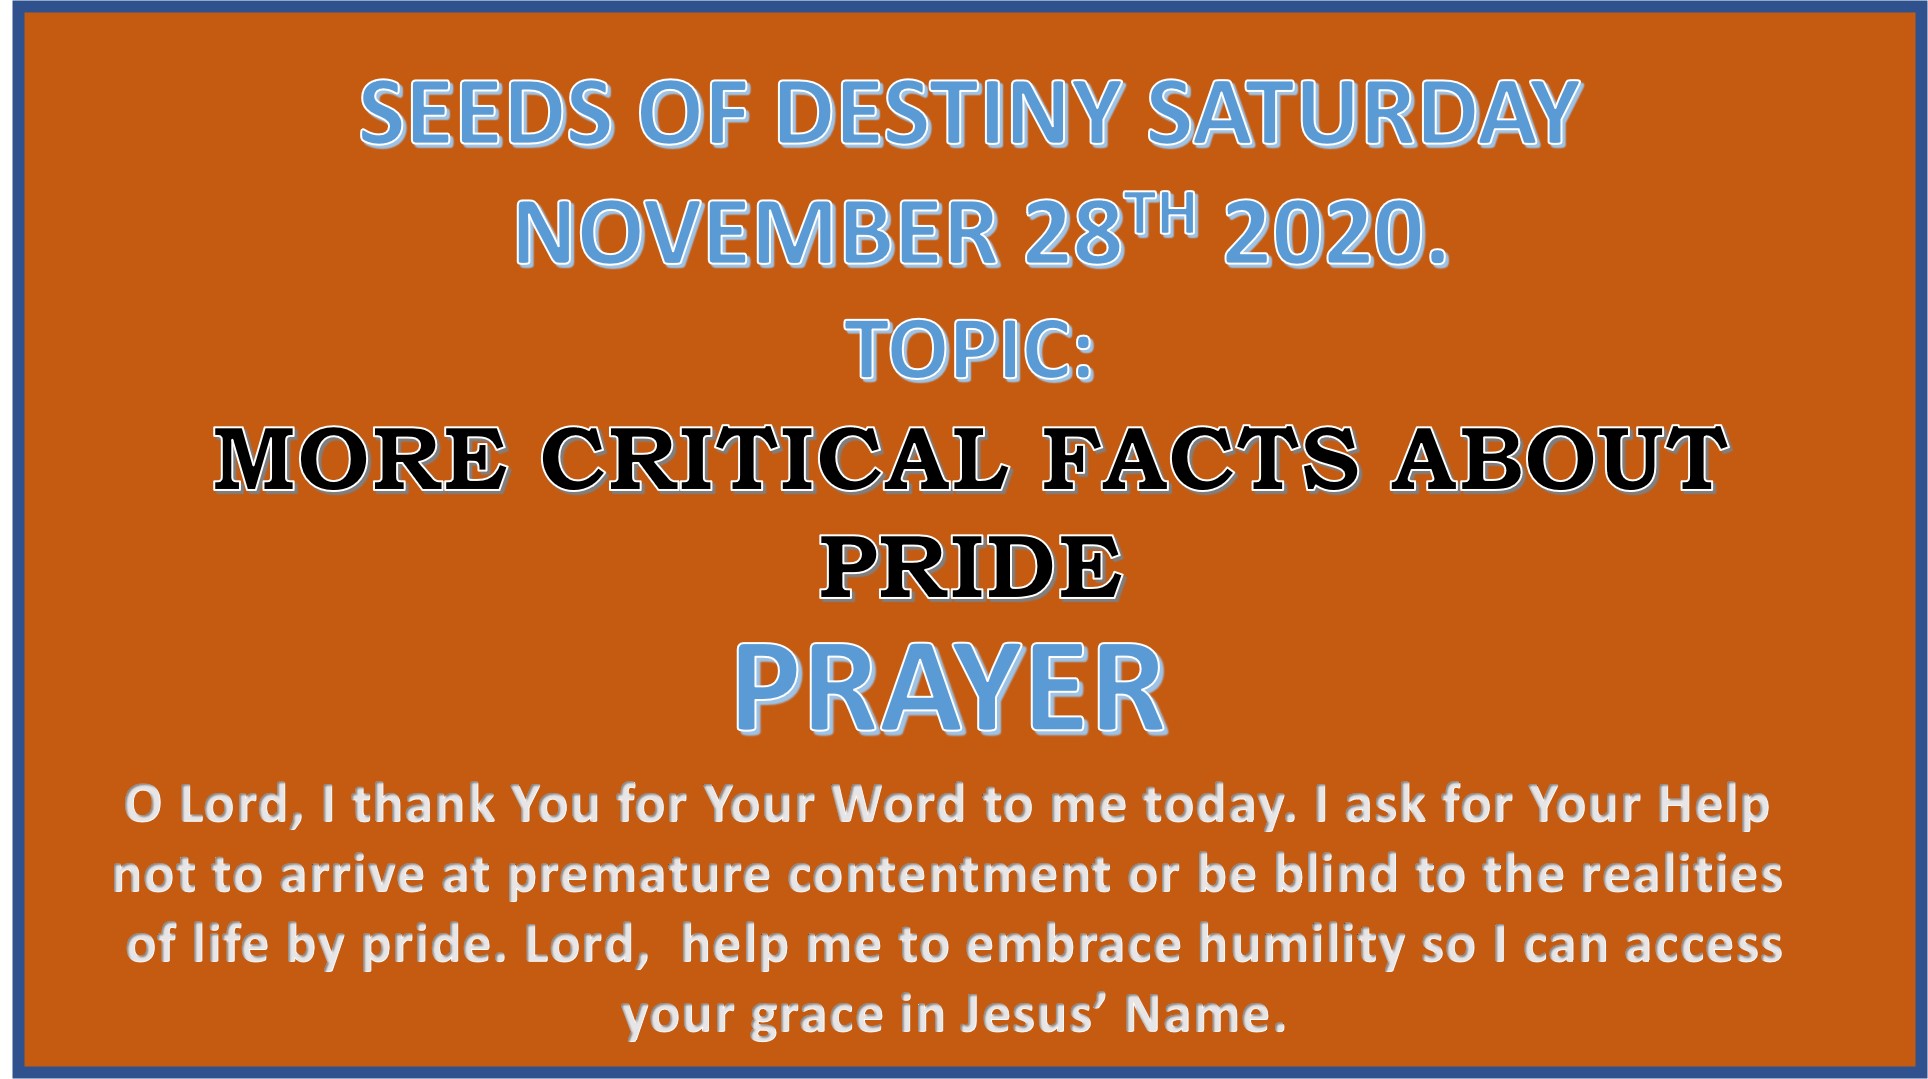 Seeds of Destiny Saturday 28th November 2020 by Dr Paul Enenche